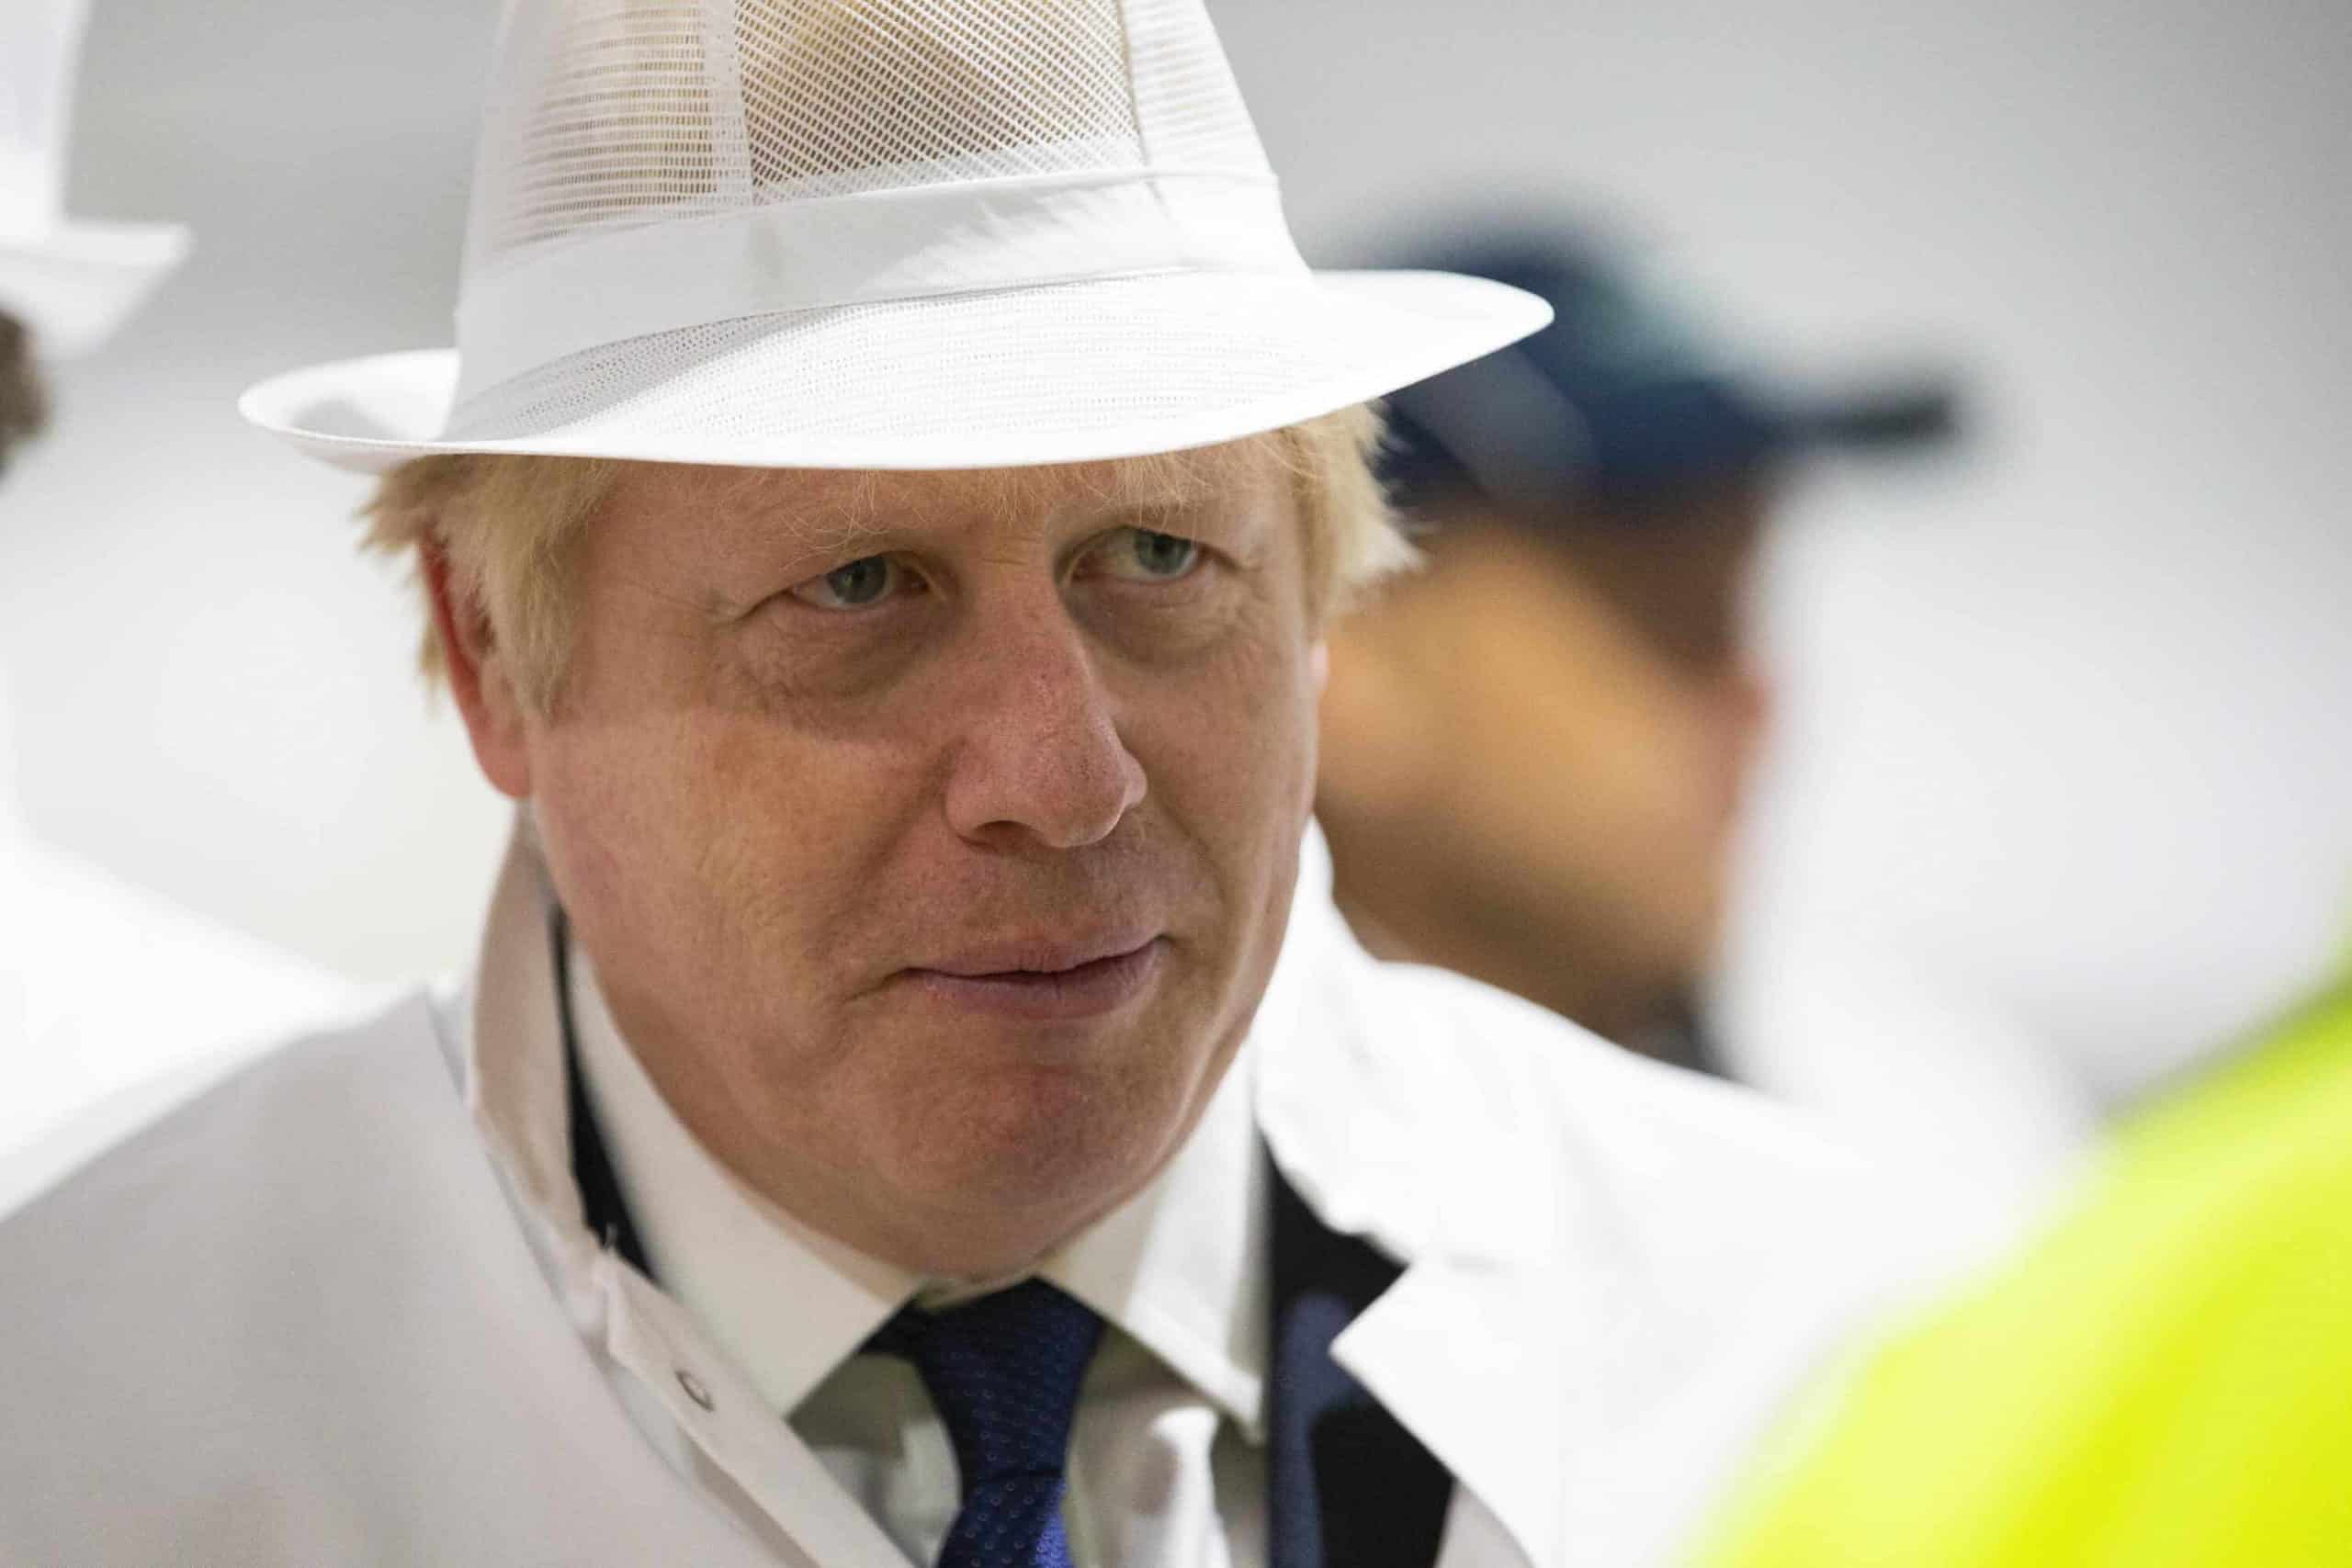 Boris Johnson suggests he could break the law to force no-deal Brexit